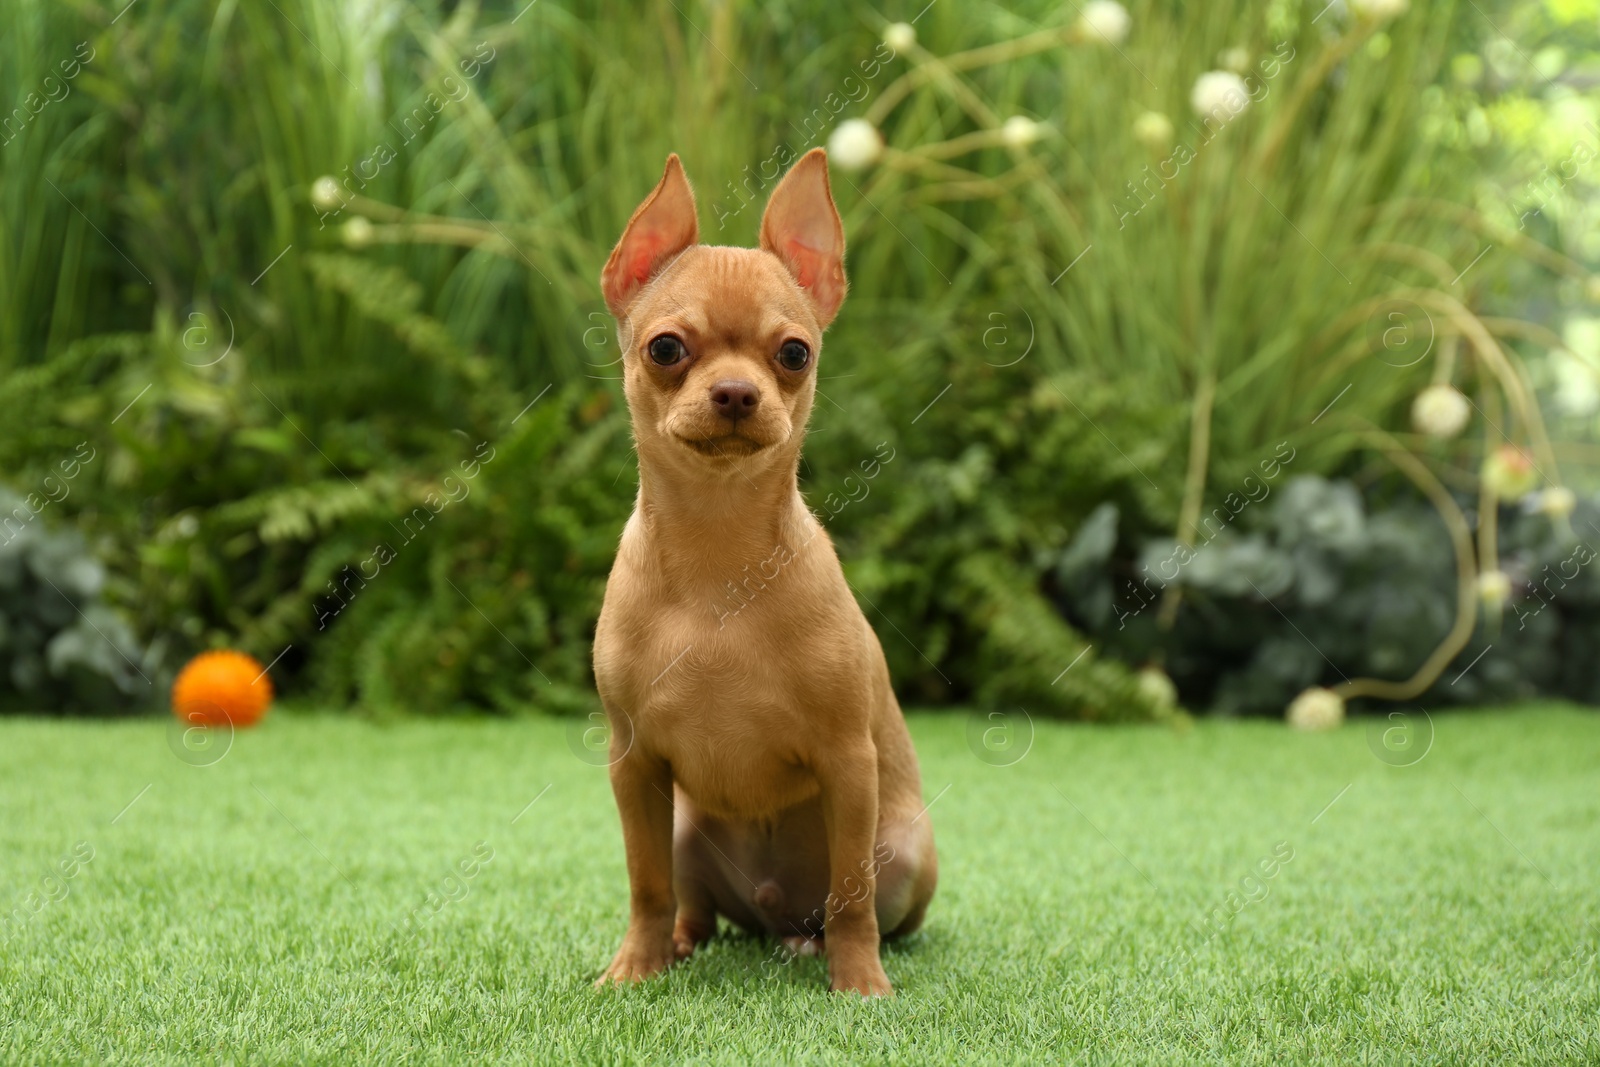 Photo of Cute Chihuahua puppy sitting on green grass outdoors. Baby animal